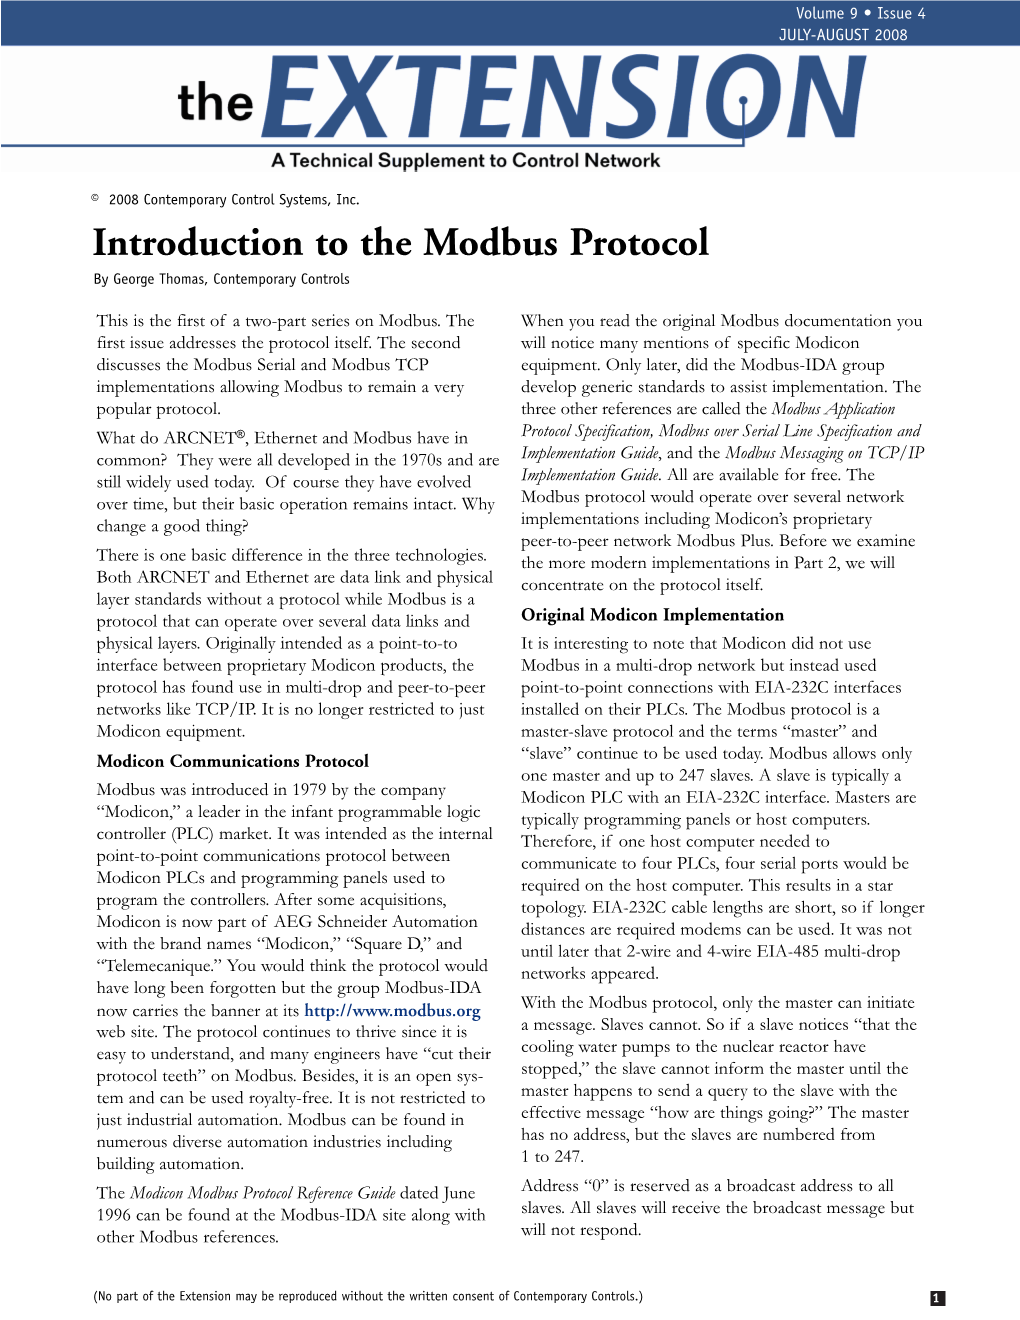 Introduction to the Modbus Protocol by George Thomas, Contemporary Controls